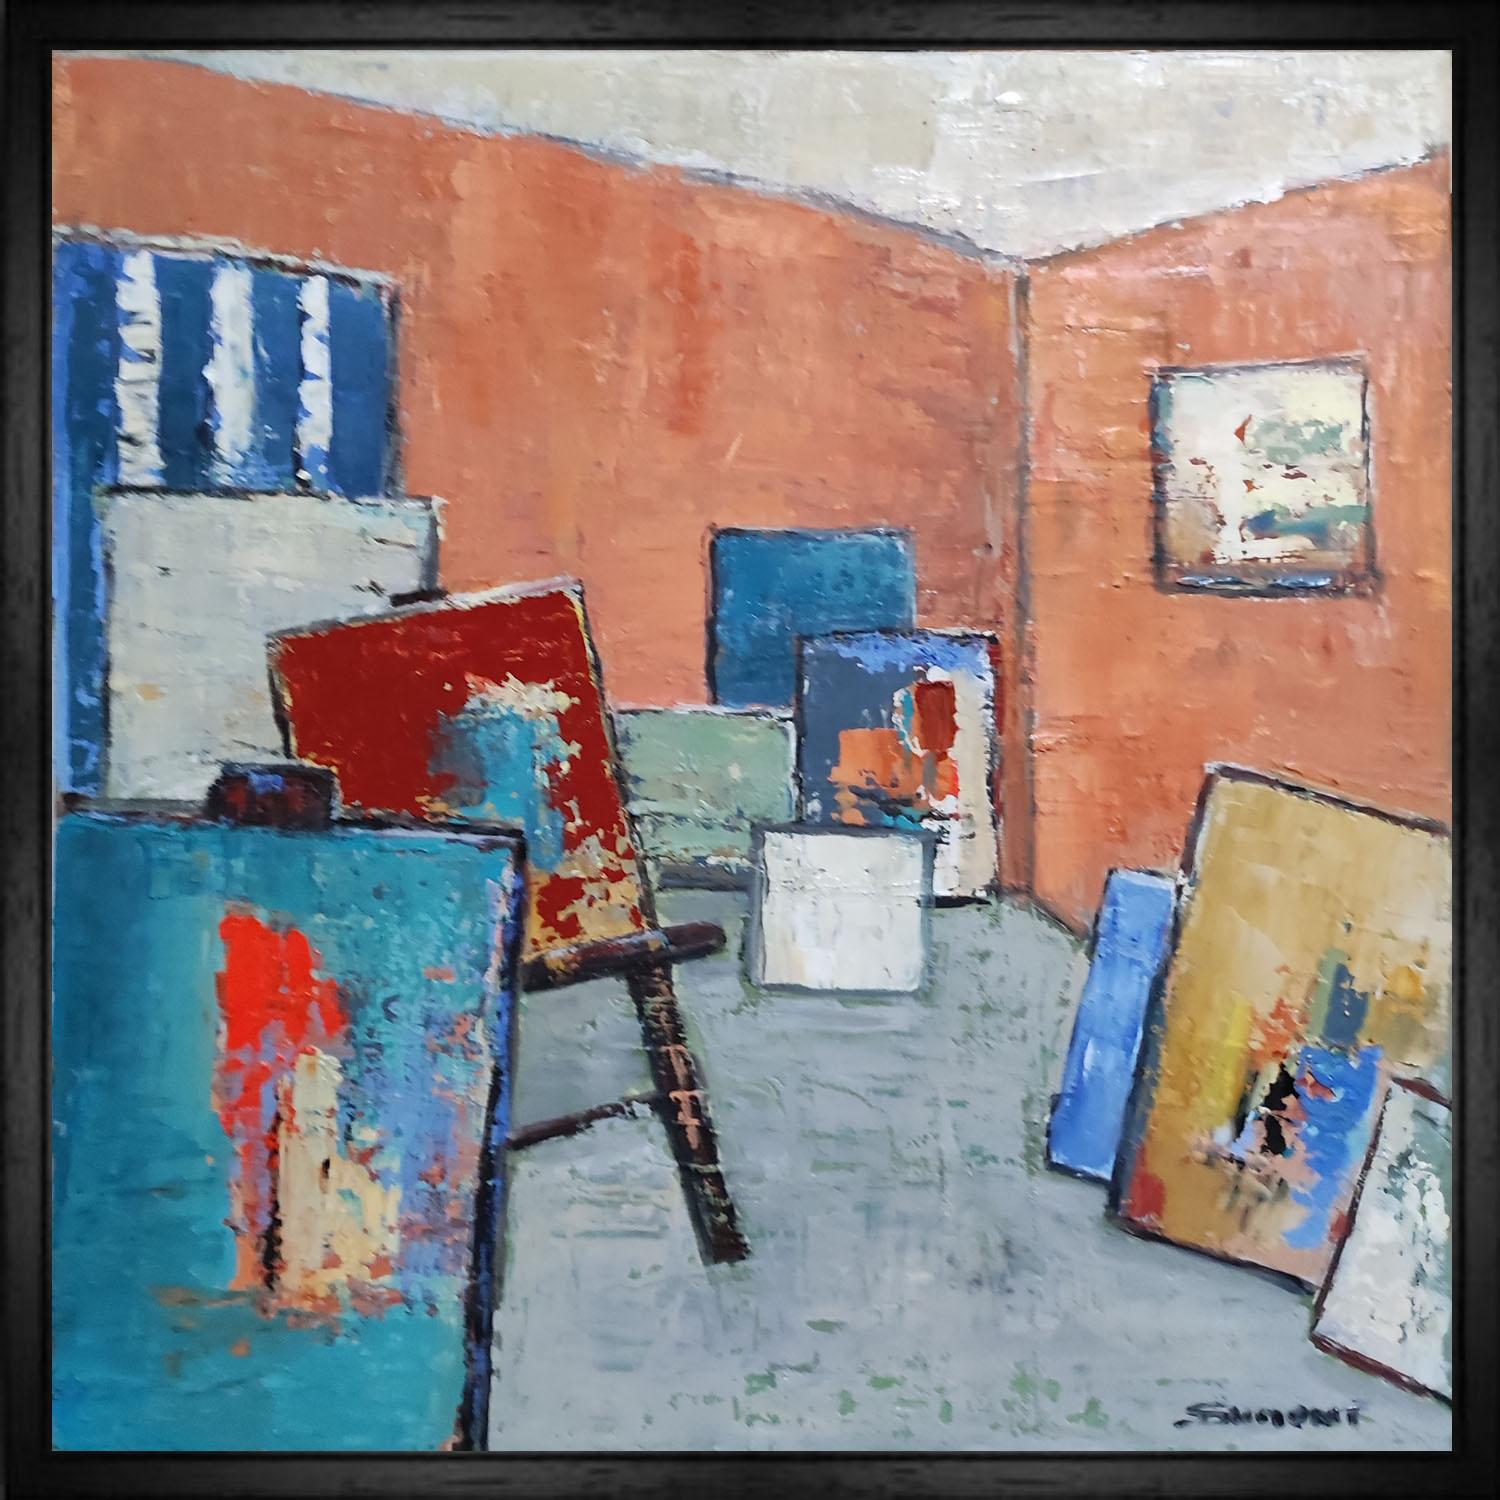 atelier 9, still life, abstract studio, oil on canvas, expressionism, french